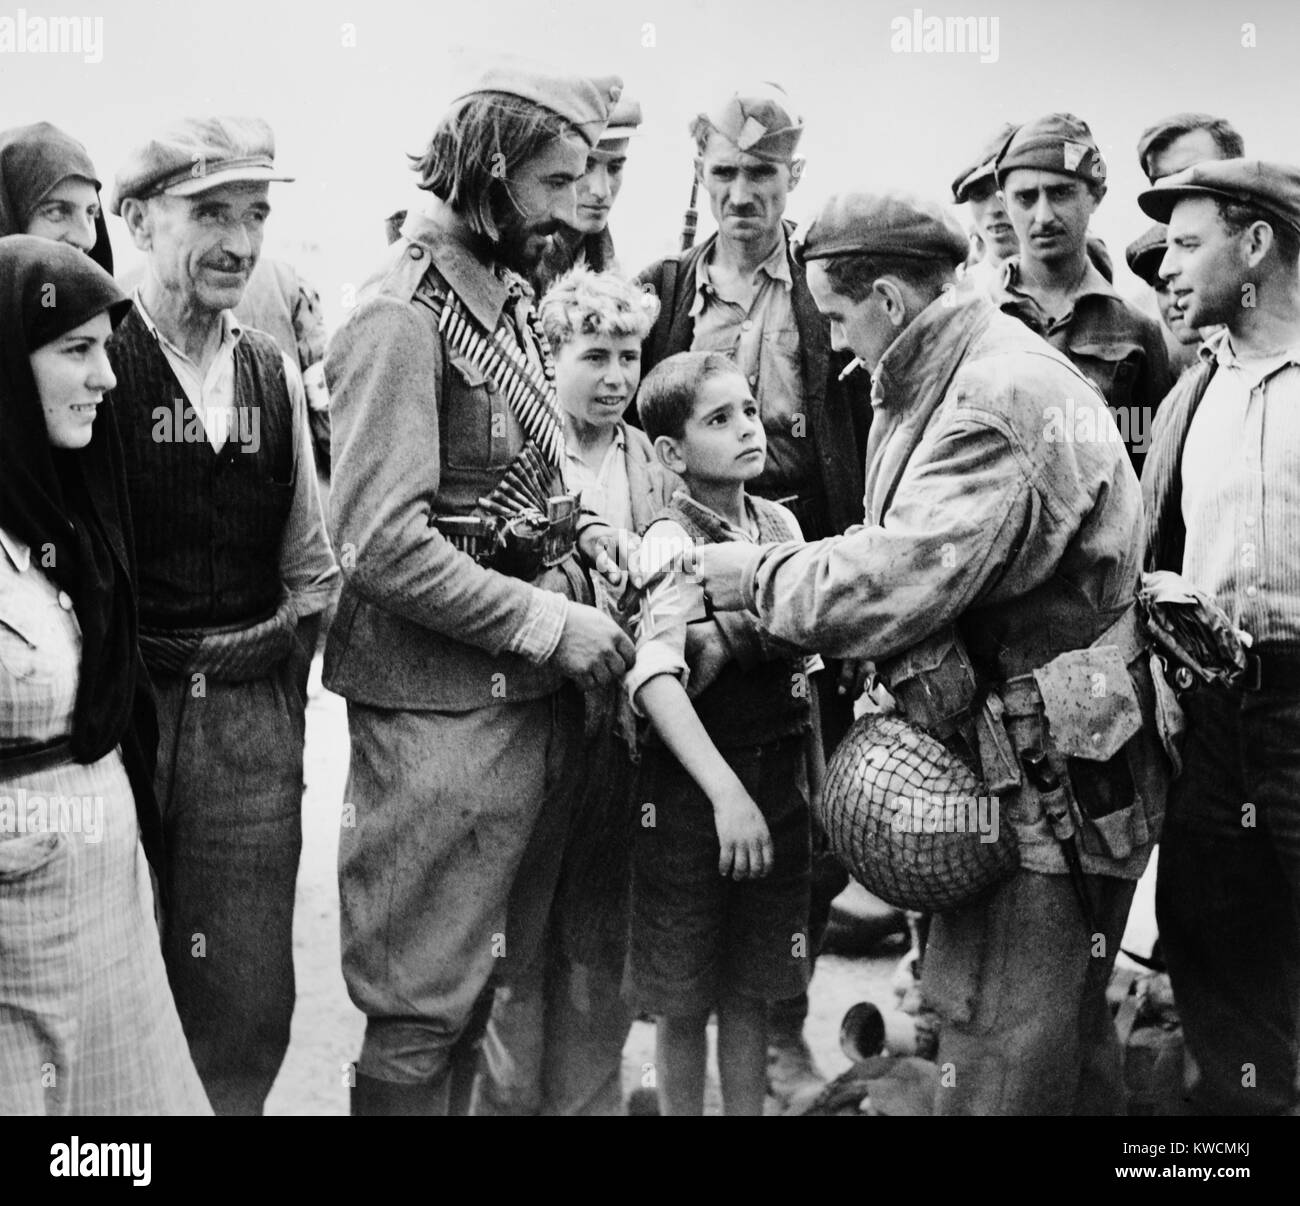 British liberator of Greece, pinning a British band on the arm of a young boy. Oct. 24, 1944. The British parachutists jumped from American C-47's over Megara airfield near Athens. - (BSLOC 2014 15 216) Stock Photo